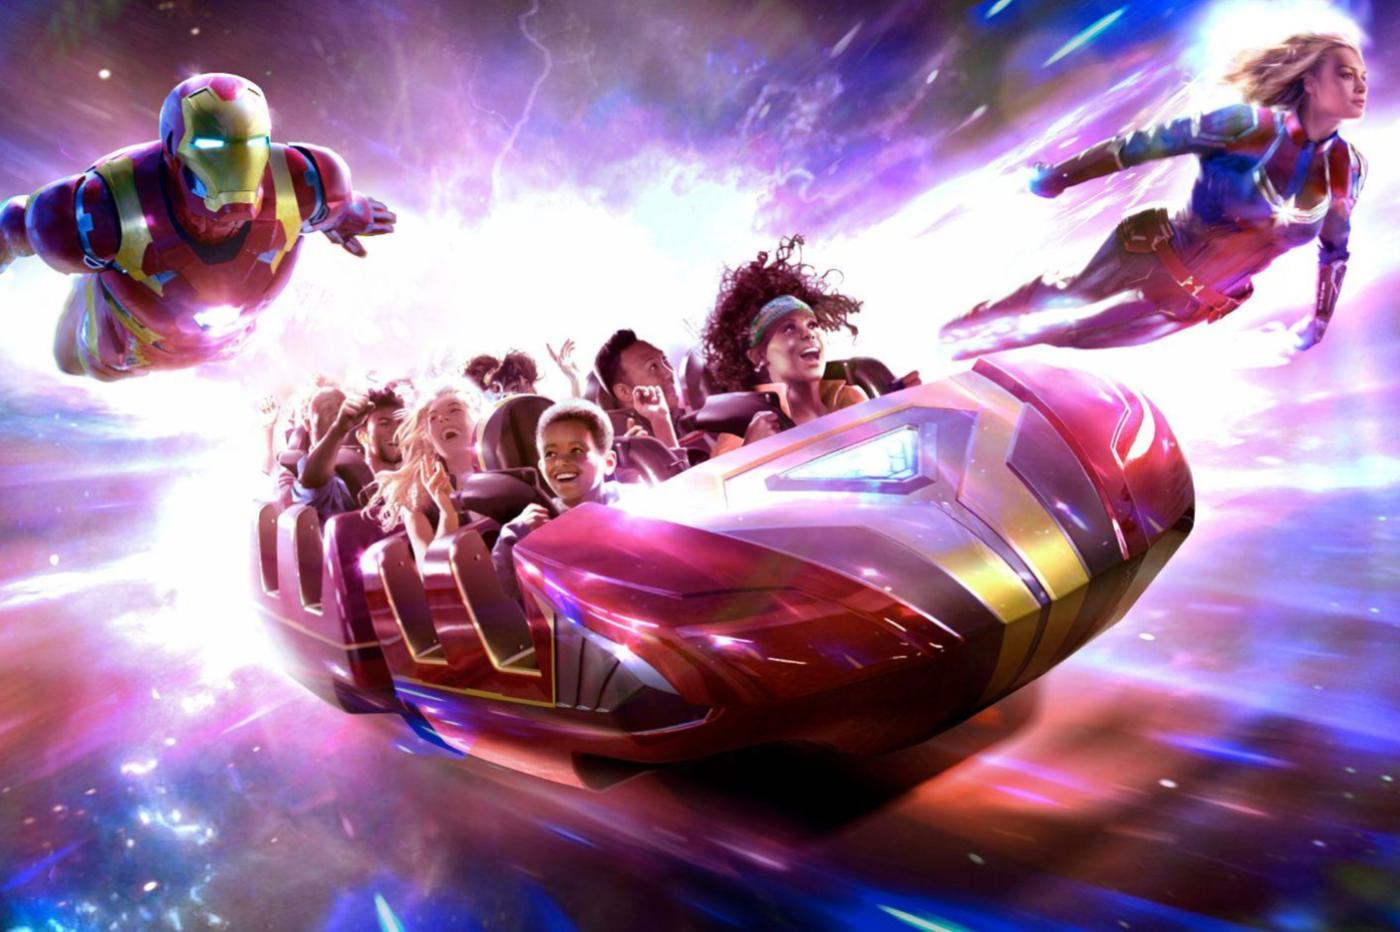 Promotional image of the Avengers Assemble Flight Force attraction showing the wagon, Iron Man and Captain Marvel